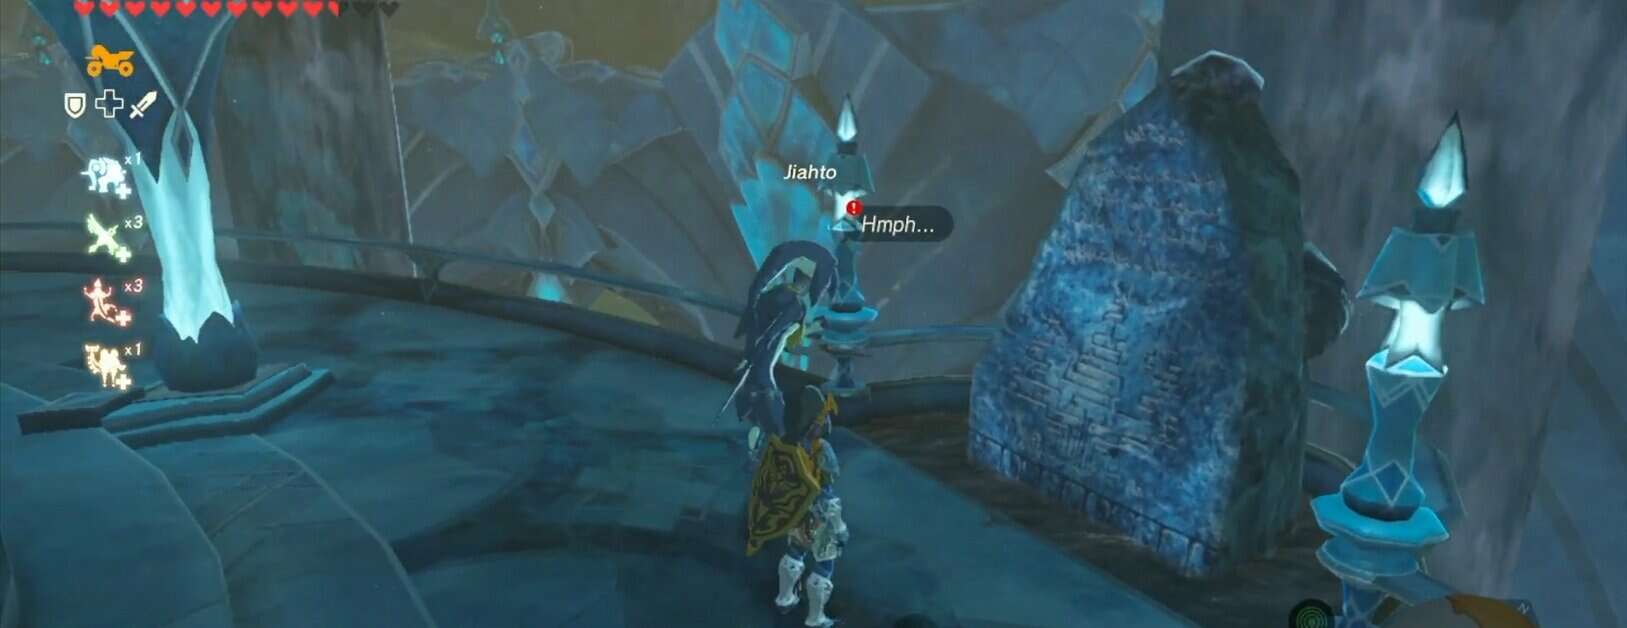 Zelda: Breath Of The Wild Zora Stone Monument Locations And Map